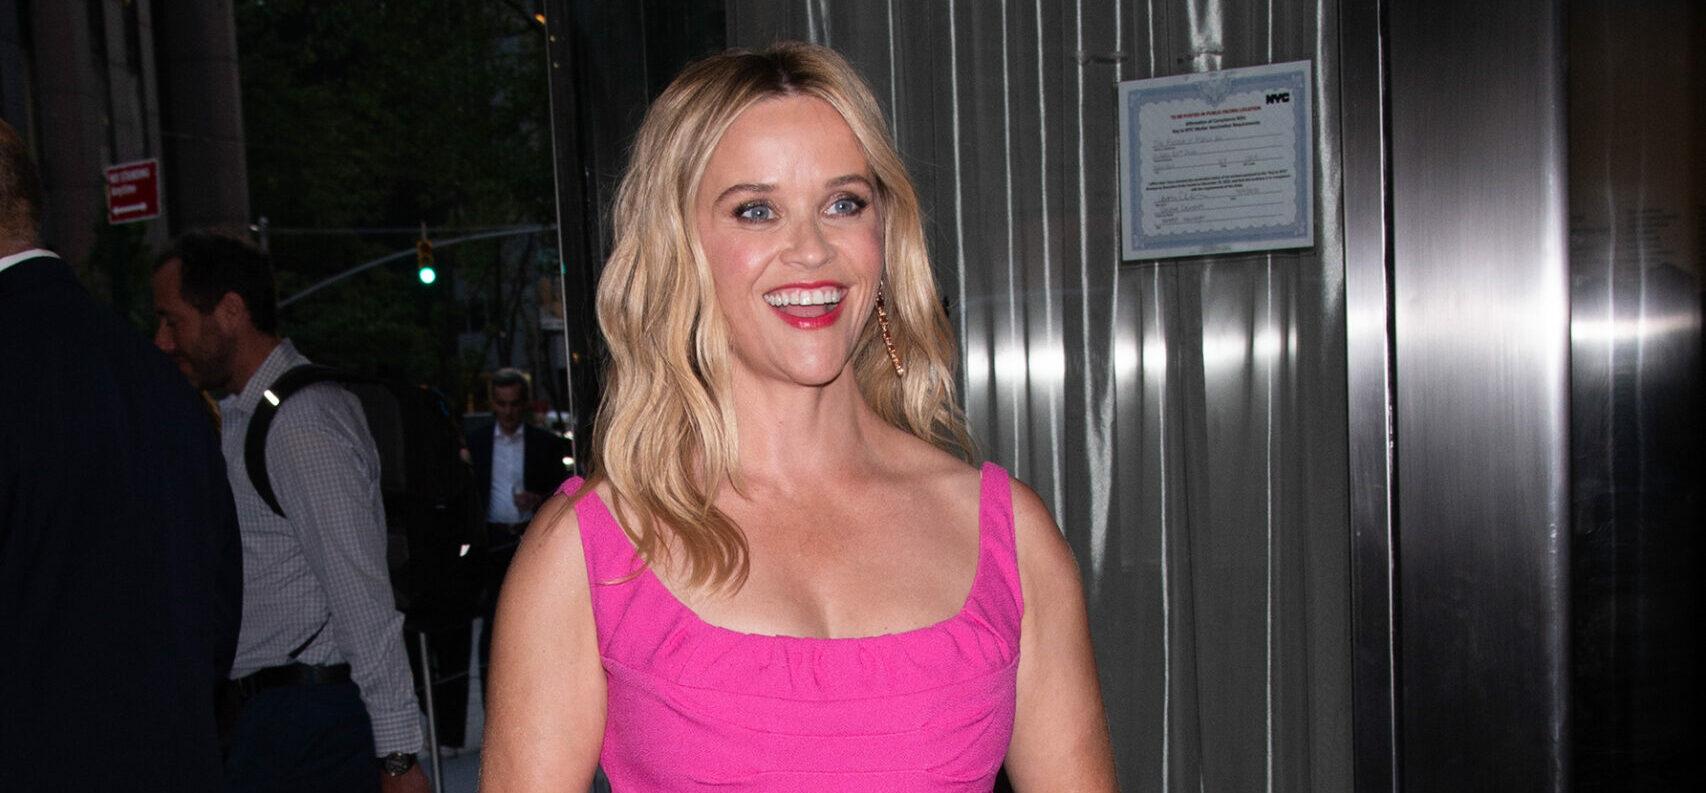 Reese Witherspoon ‘Excited’ About Possible New Romance After Jim Toth Divorce